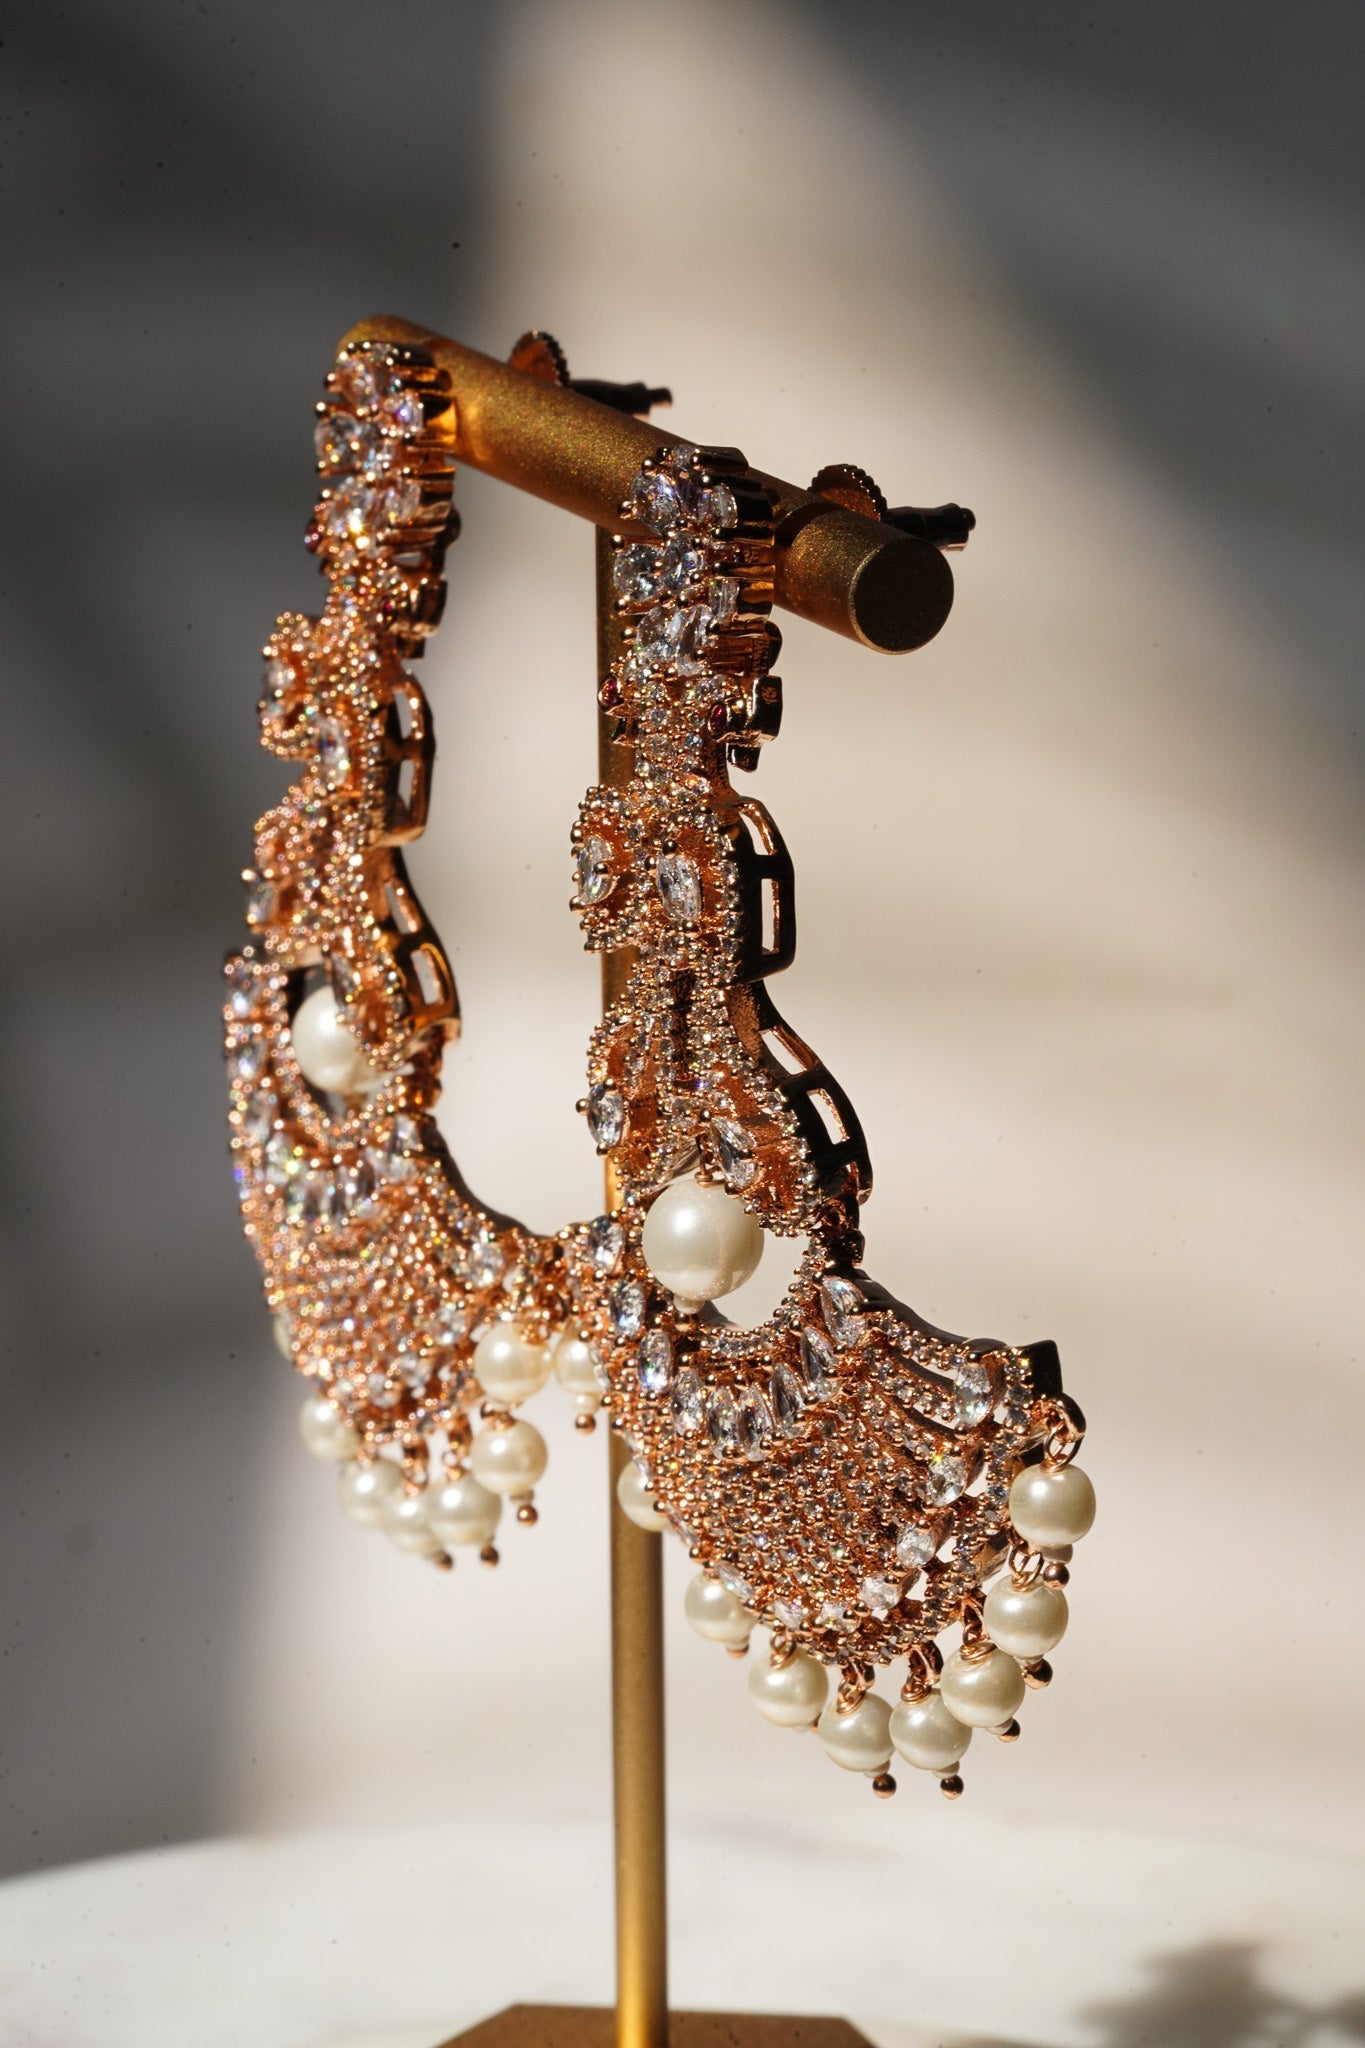 Mayoori - Rose Gold Statement AD Earrings Chandelier from Inaury